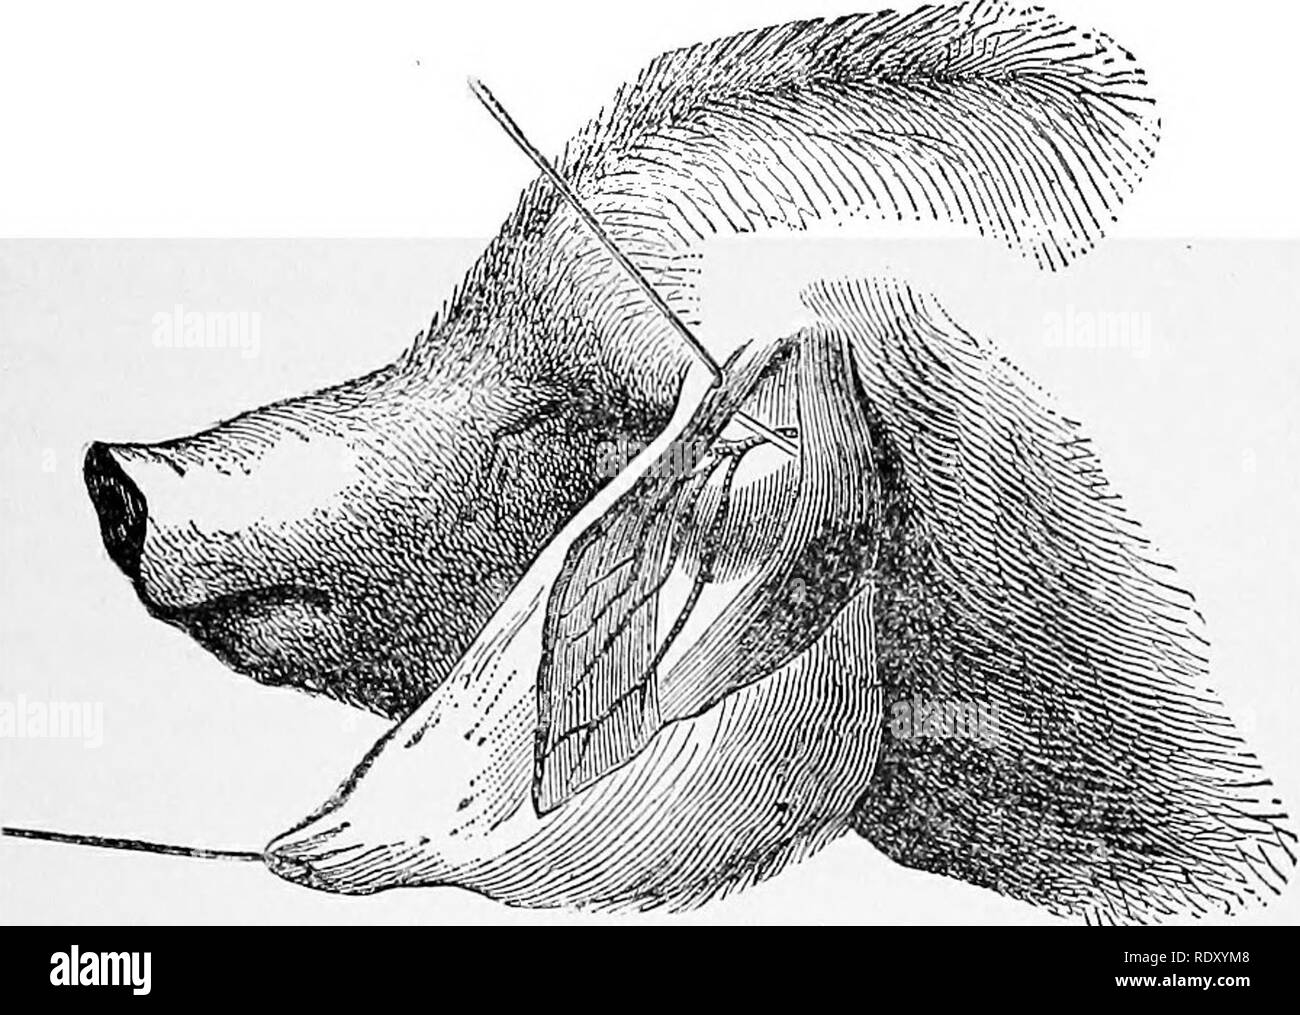 . Manual of operative veterinary surgery. Veterinary surgery. CAPILLARY BLEEDING. 517. Fig. 449.—Anatomy of the Posterior Auricular Artery in Swine. caudal muscles, then becoming superficial and readUy accessible to the end of the member. In opening it, it is pierced by the lancet in the longitudinal axis of the vessel, the tail being kept elevated. Ordinarily, however, not only is the artery cut directly . across, but the slnn or surrounding muscular fibres are included. The incision must be made on a level with the superior third of the tail; higher up the operation may be complicated with a Stock Photo